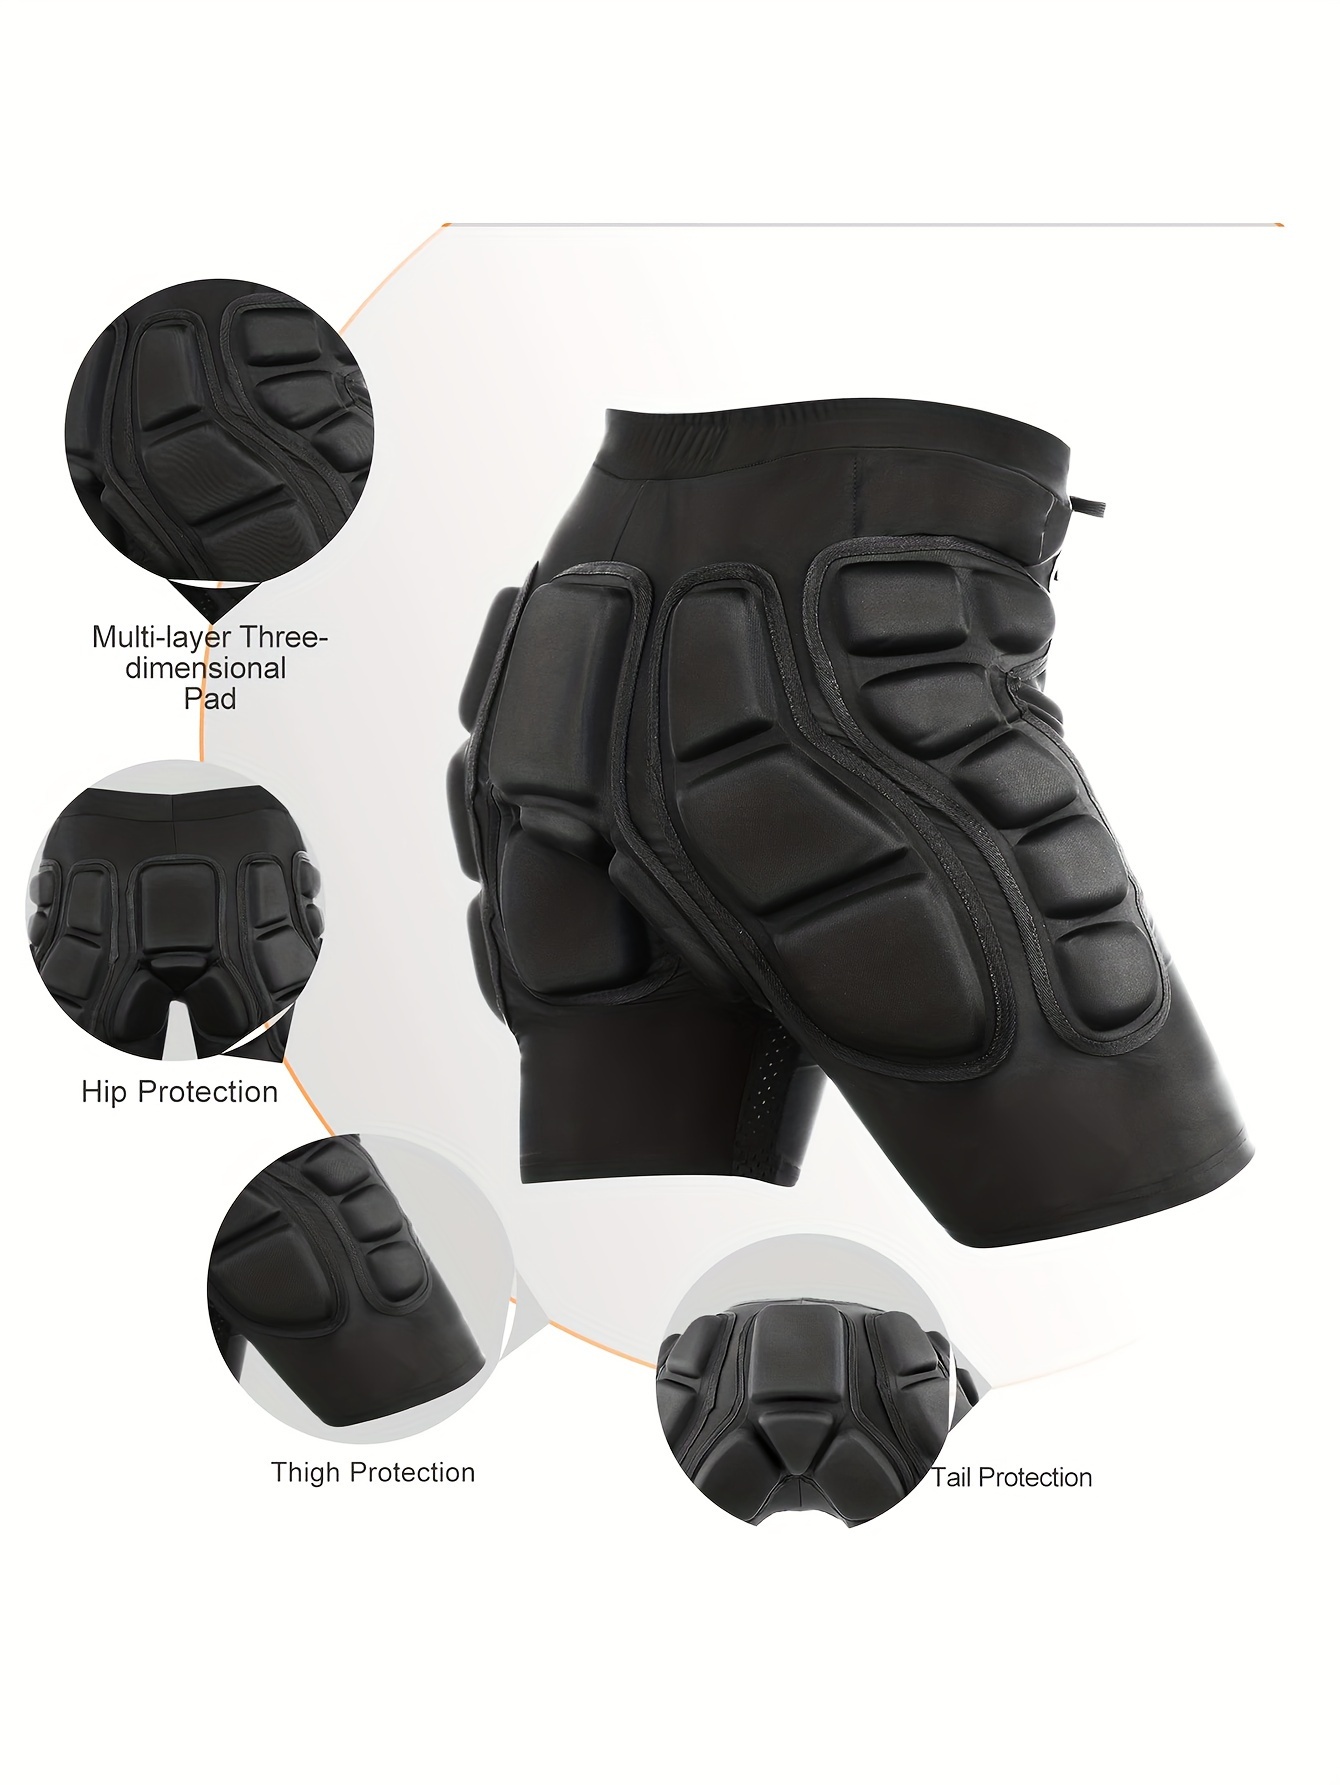 Women's Hip Butt Protection Padded Shorts Armor Hip Protection